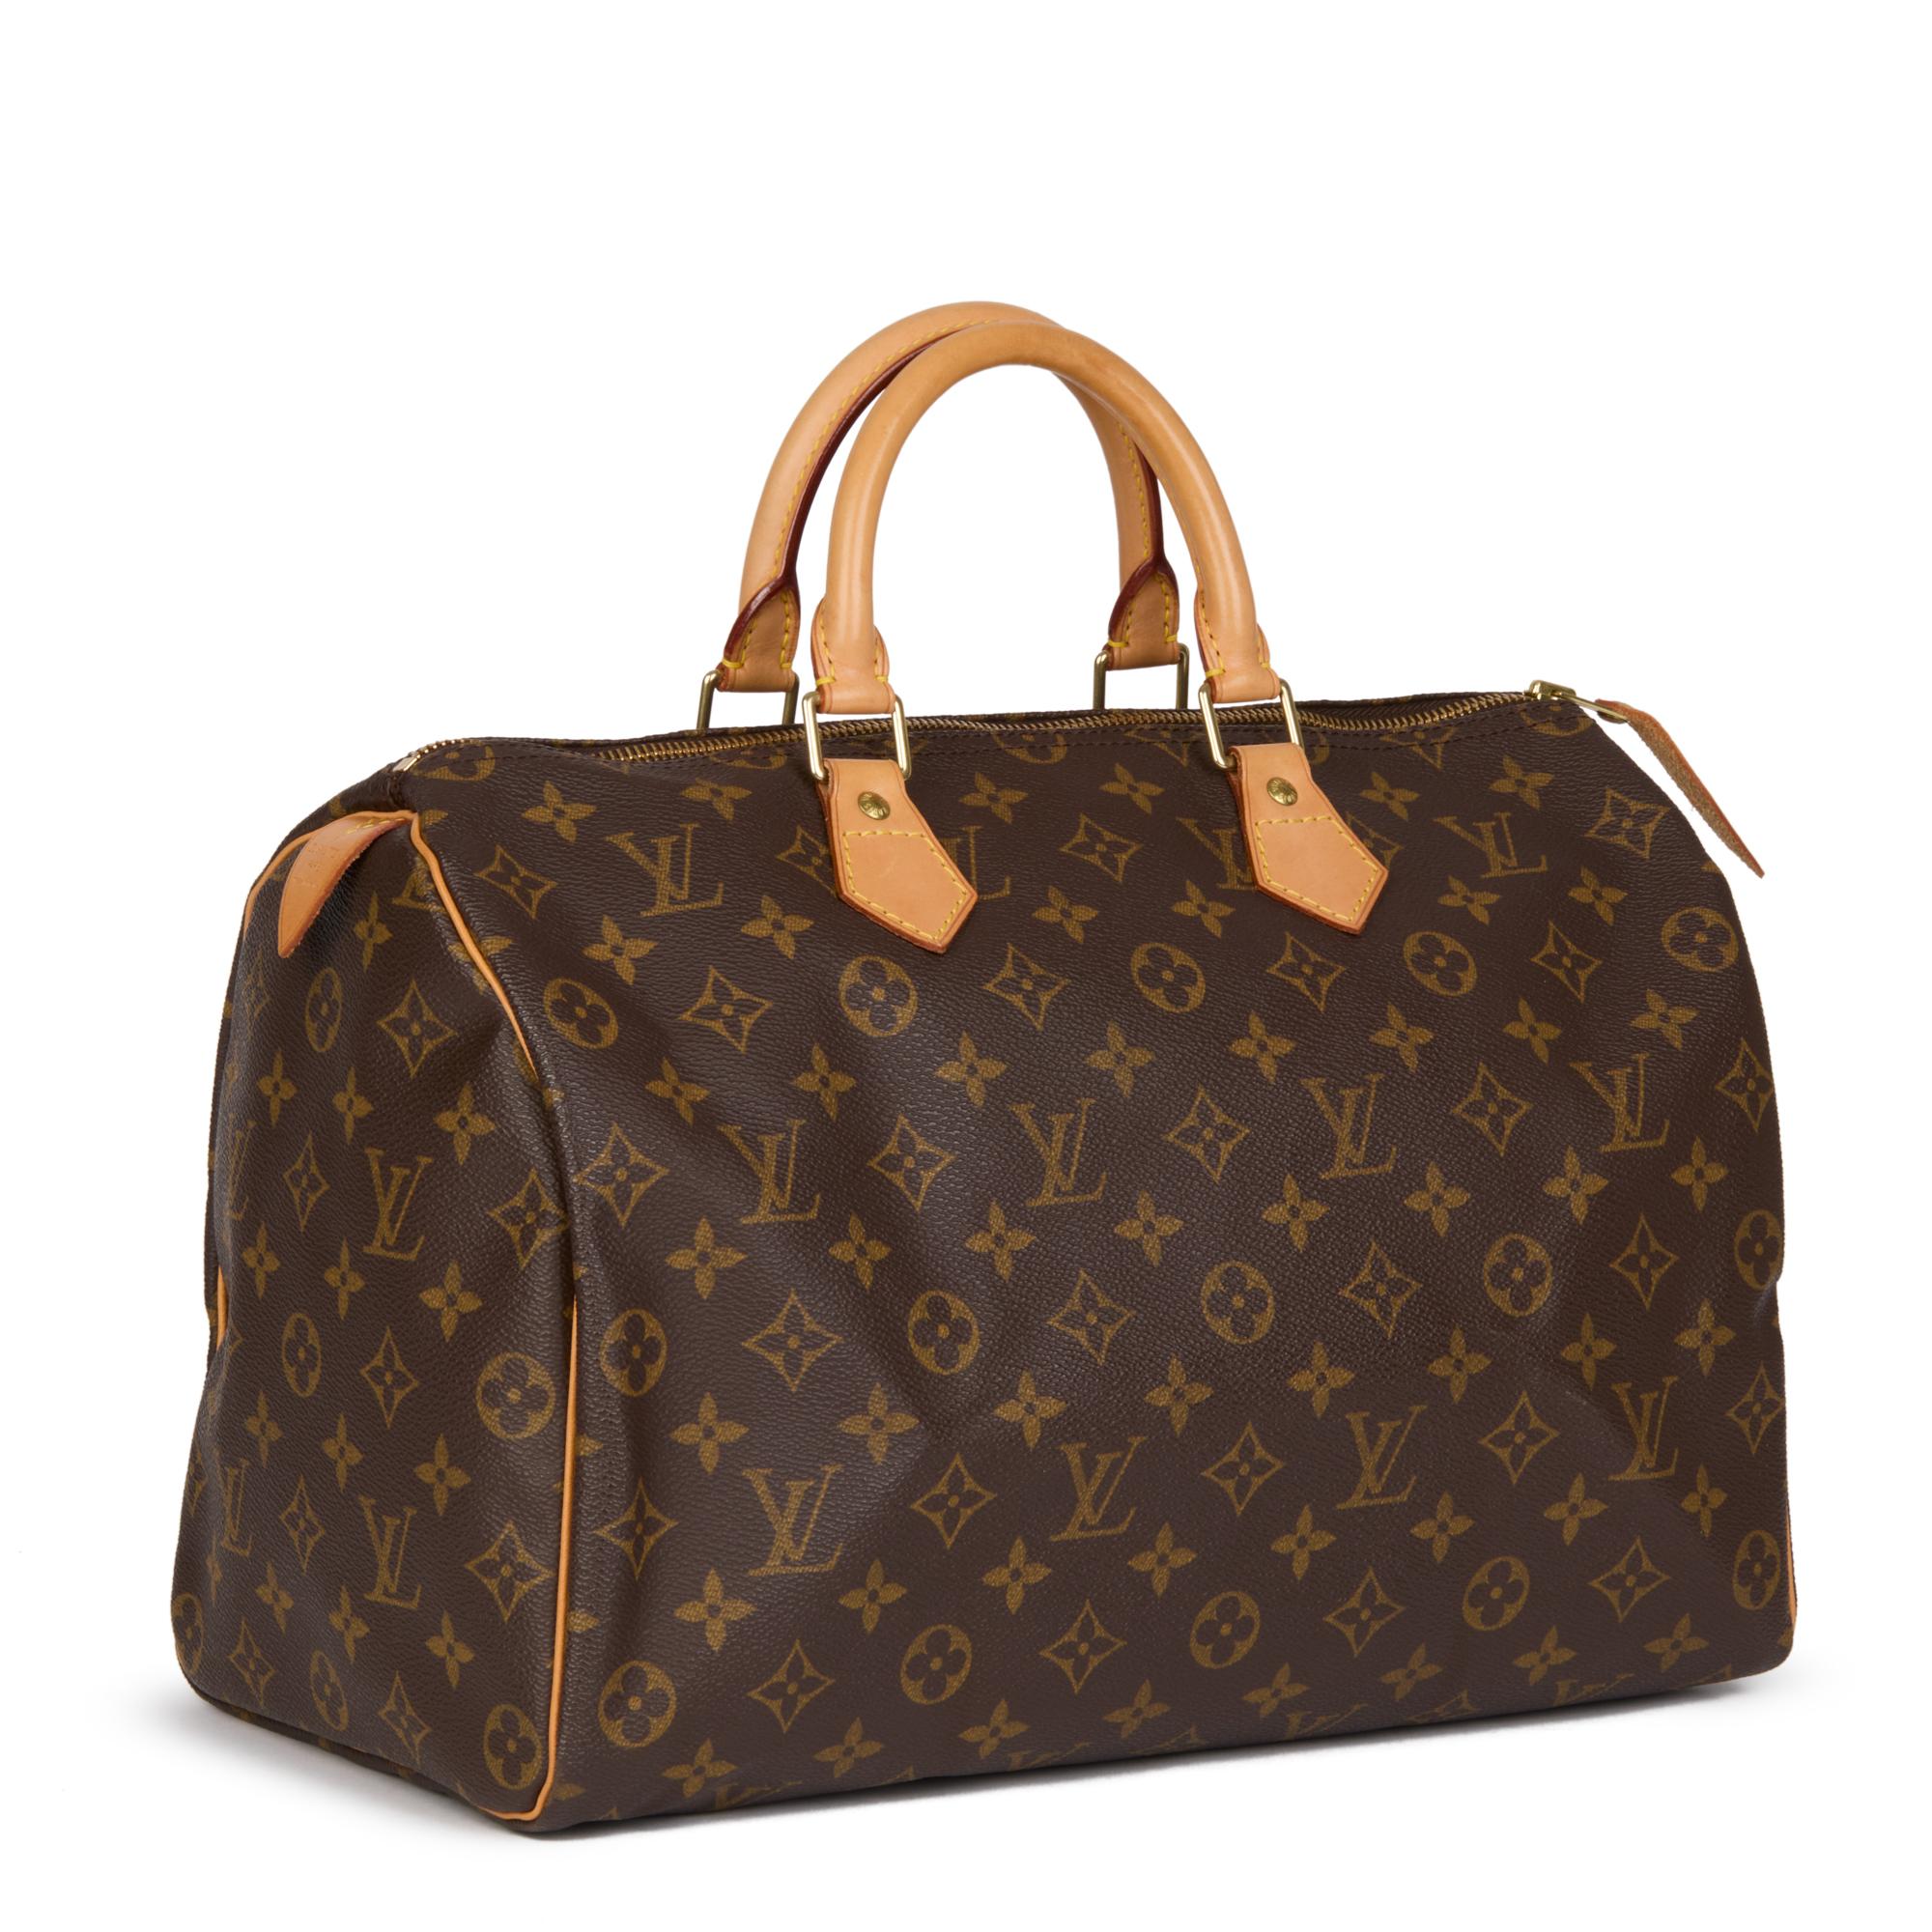 LOUIS VUITTON
Brown Monogram Coated Canvas & Vachetta Leather Vintage Speedy 35

Xupes Reference: HB4460
Serial Number: SP0948
Age (Circa): 1998
Authenticity Details: Date Stamp (Made in France) 
Gender: Ladies
Type: Tote

Colour: Brown 
Hardware: